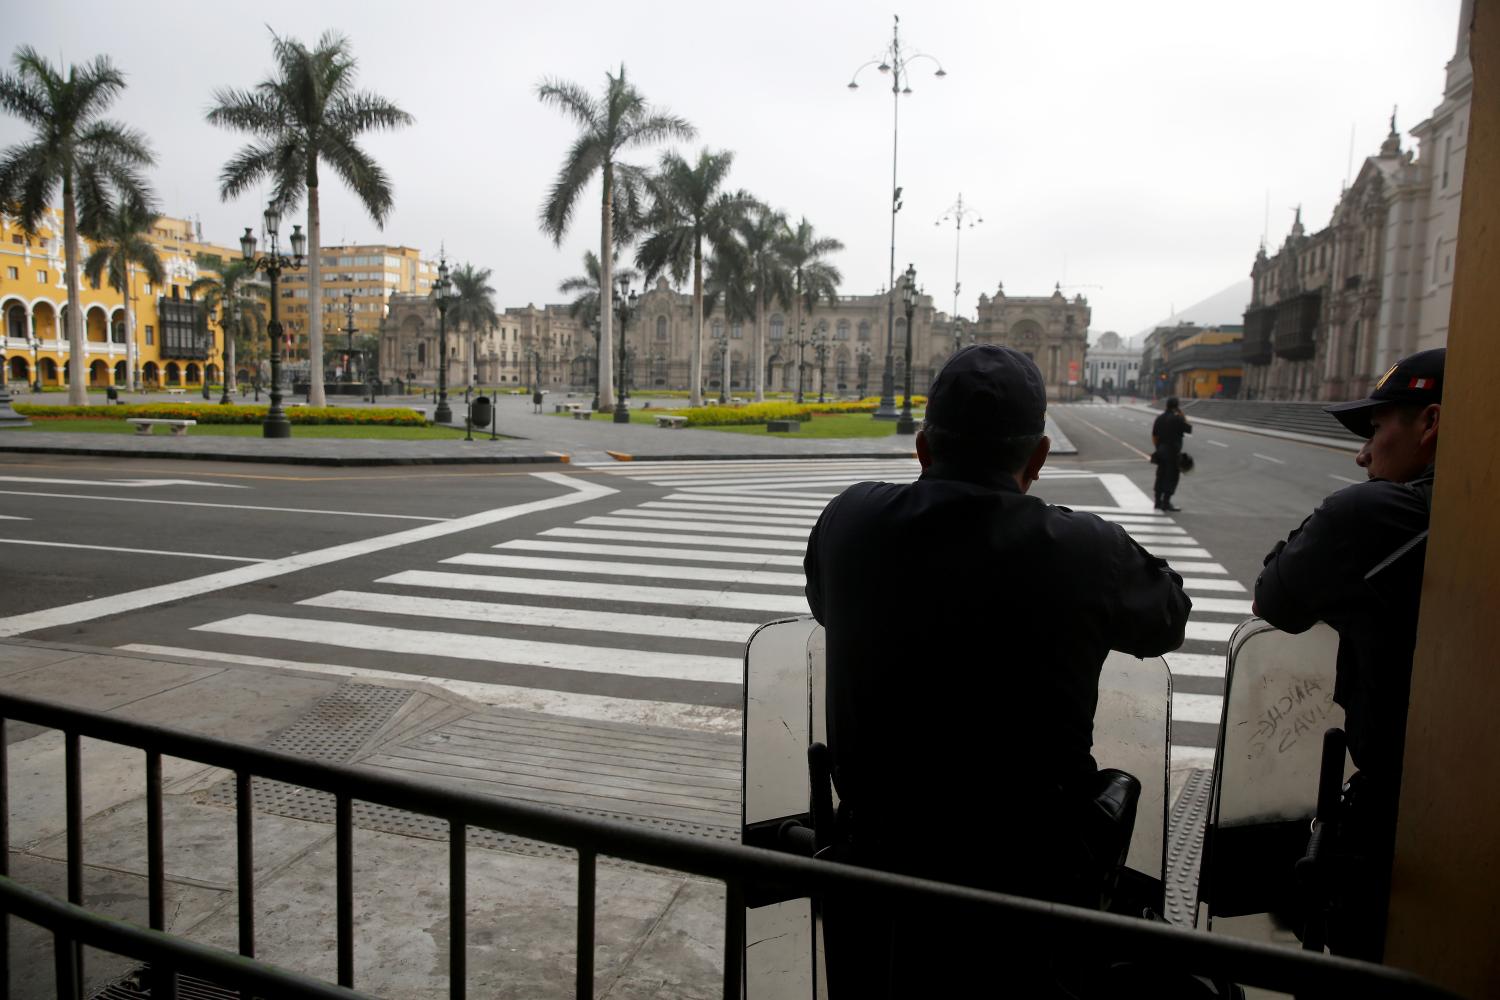 Police officers guard an empty Plaza de Armas after Peru's government deployed military personnel to block major roads, as the country rolled out a 15-day state of emergency to slow the spread of coronavirus disease (COVID-19), in Lima, Peru March 16, 2020. REUTERS/Sebastian Castaneda NO RESALES. NO ARCHIVES